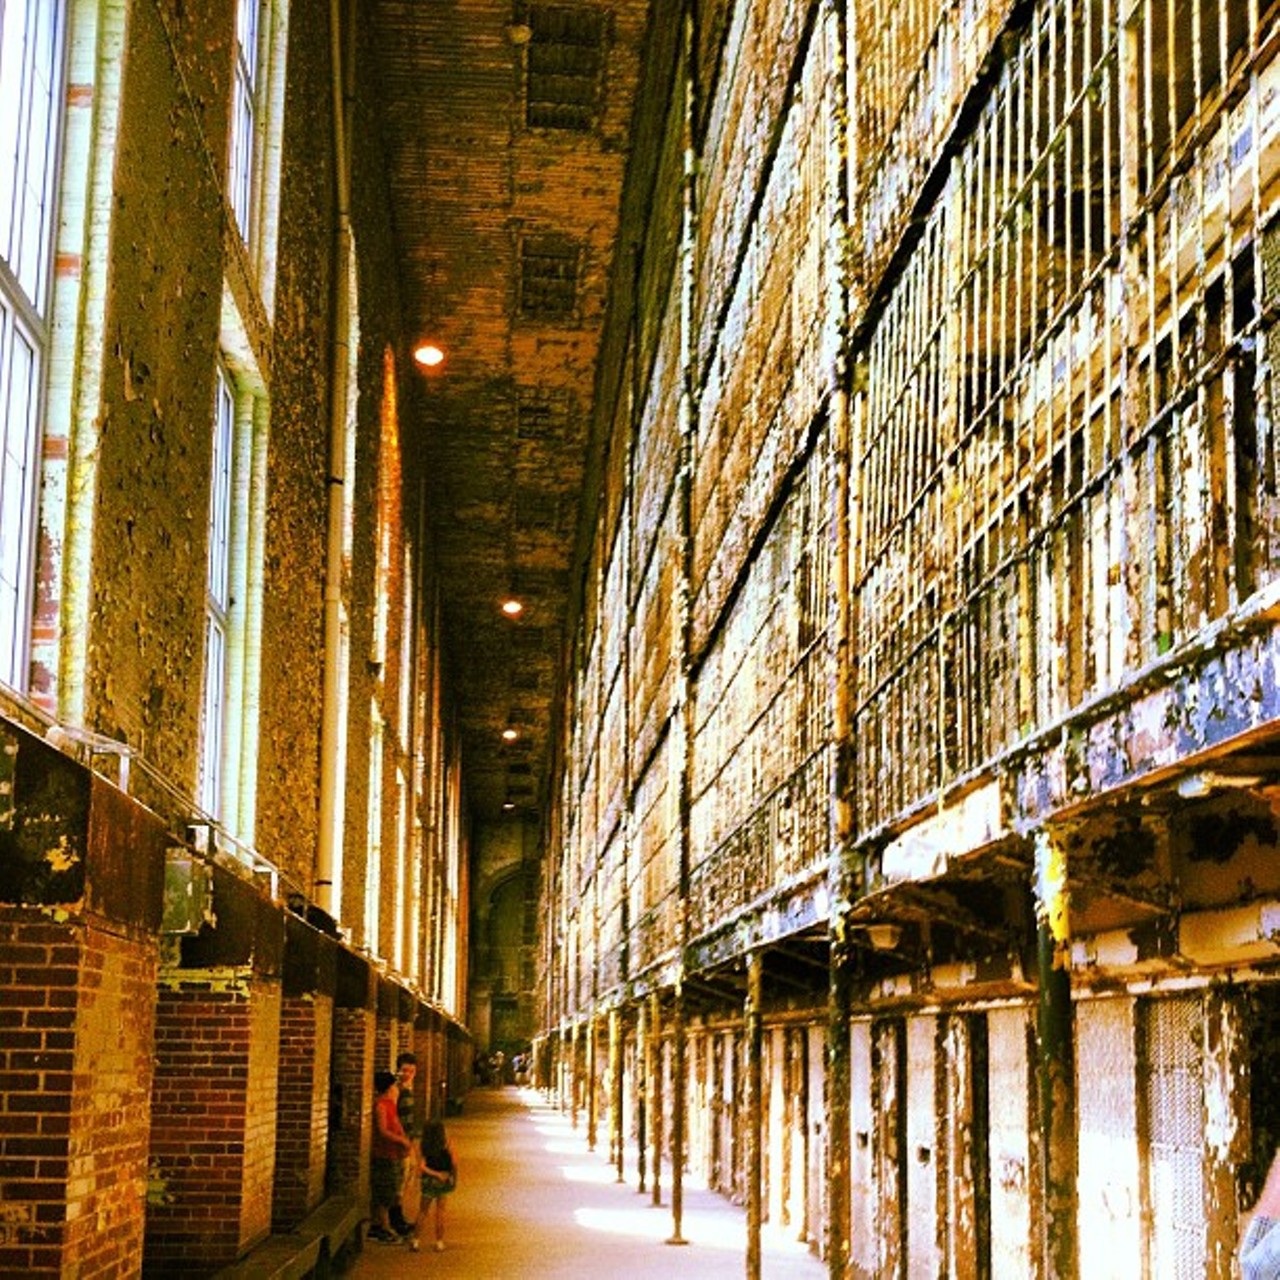 Built in 1886, the Mansfield Reformatory was intended to be a milestone in prison reform. However, it soon gained a reputation for abuse, murder and torture. The prison shut down in 1990, but it is widely regarded as one of the most active haunted places in the United States. The spirits of workers and prisoners reportedly remained trapped, haunting the deteriorating and very intimidating prison.